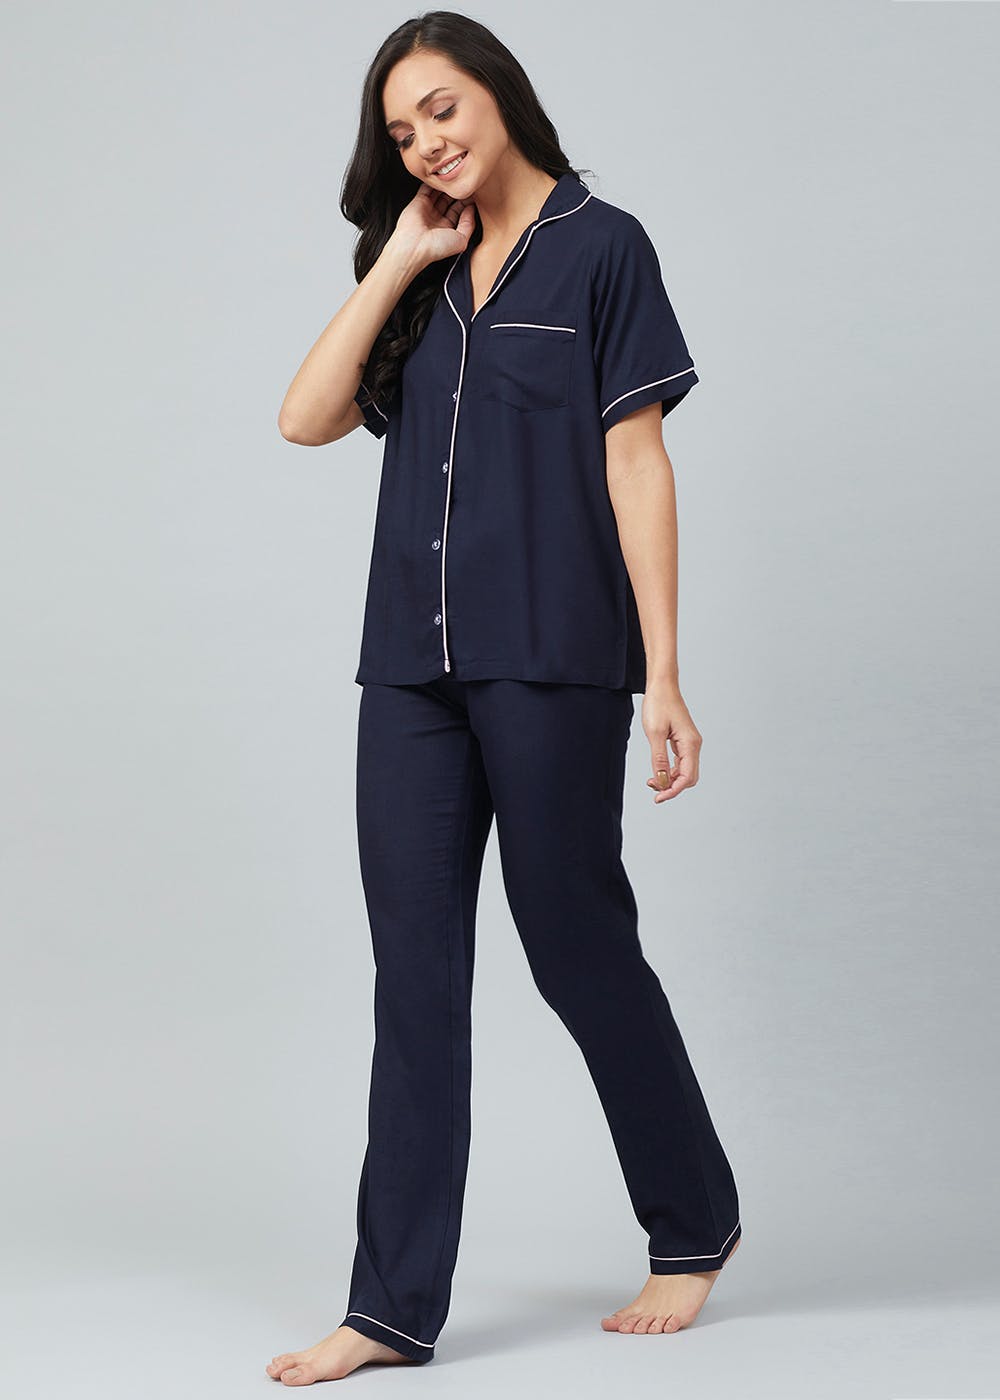 Contrast Piping Detail Navy Nightsuit Set